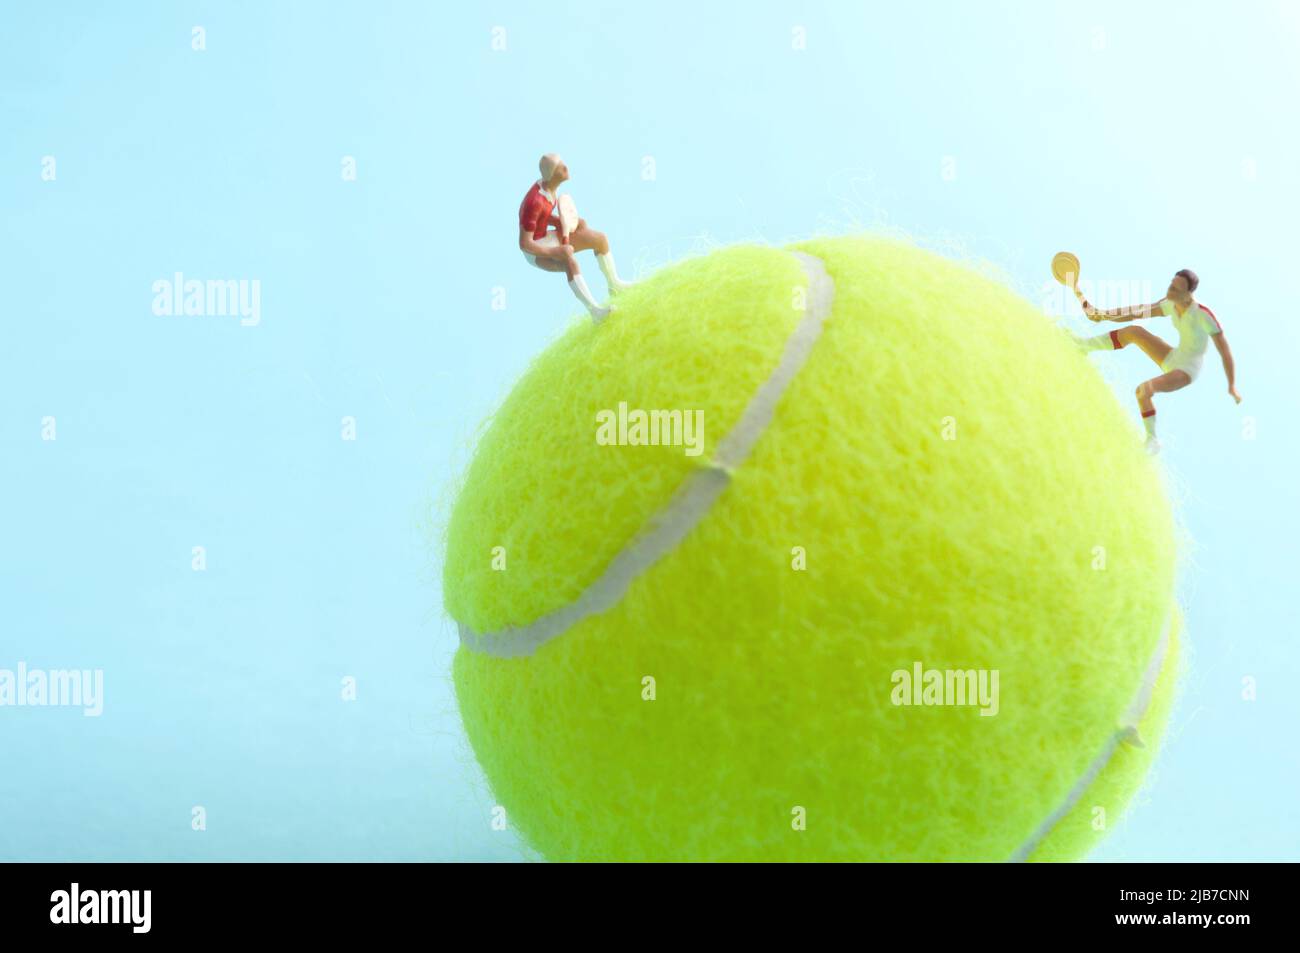 Two miniature tennis players on top of a ball competing in a match Stock Photo